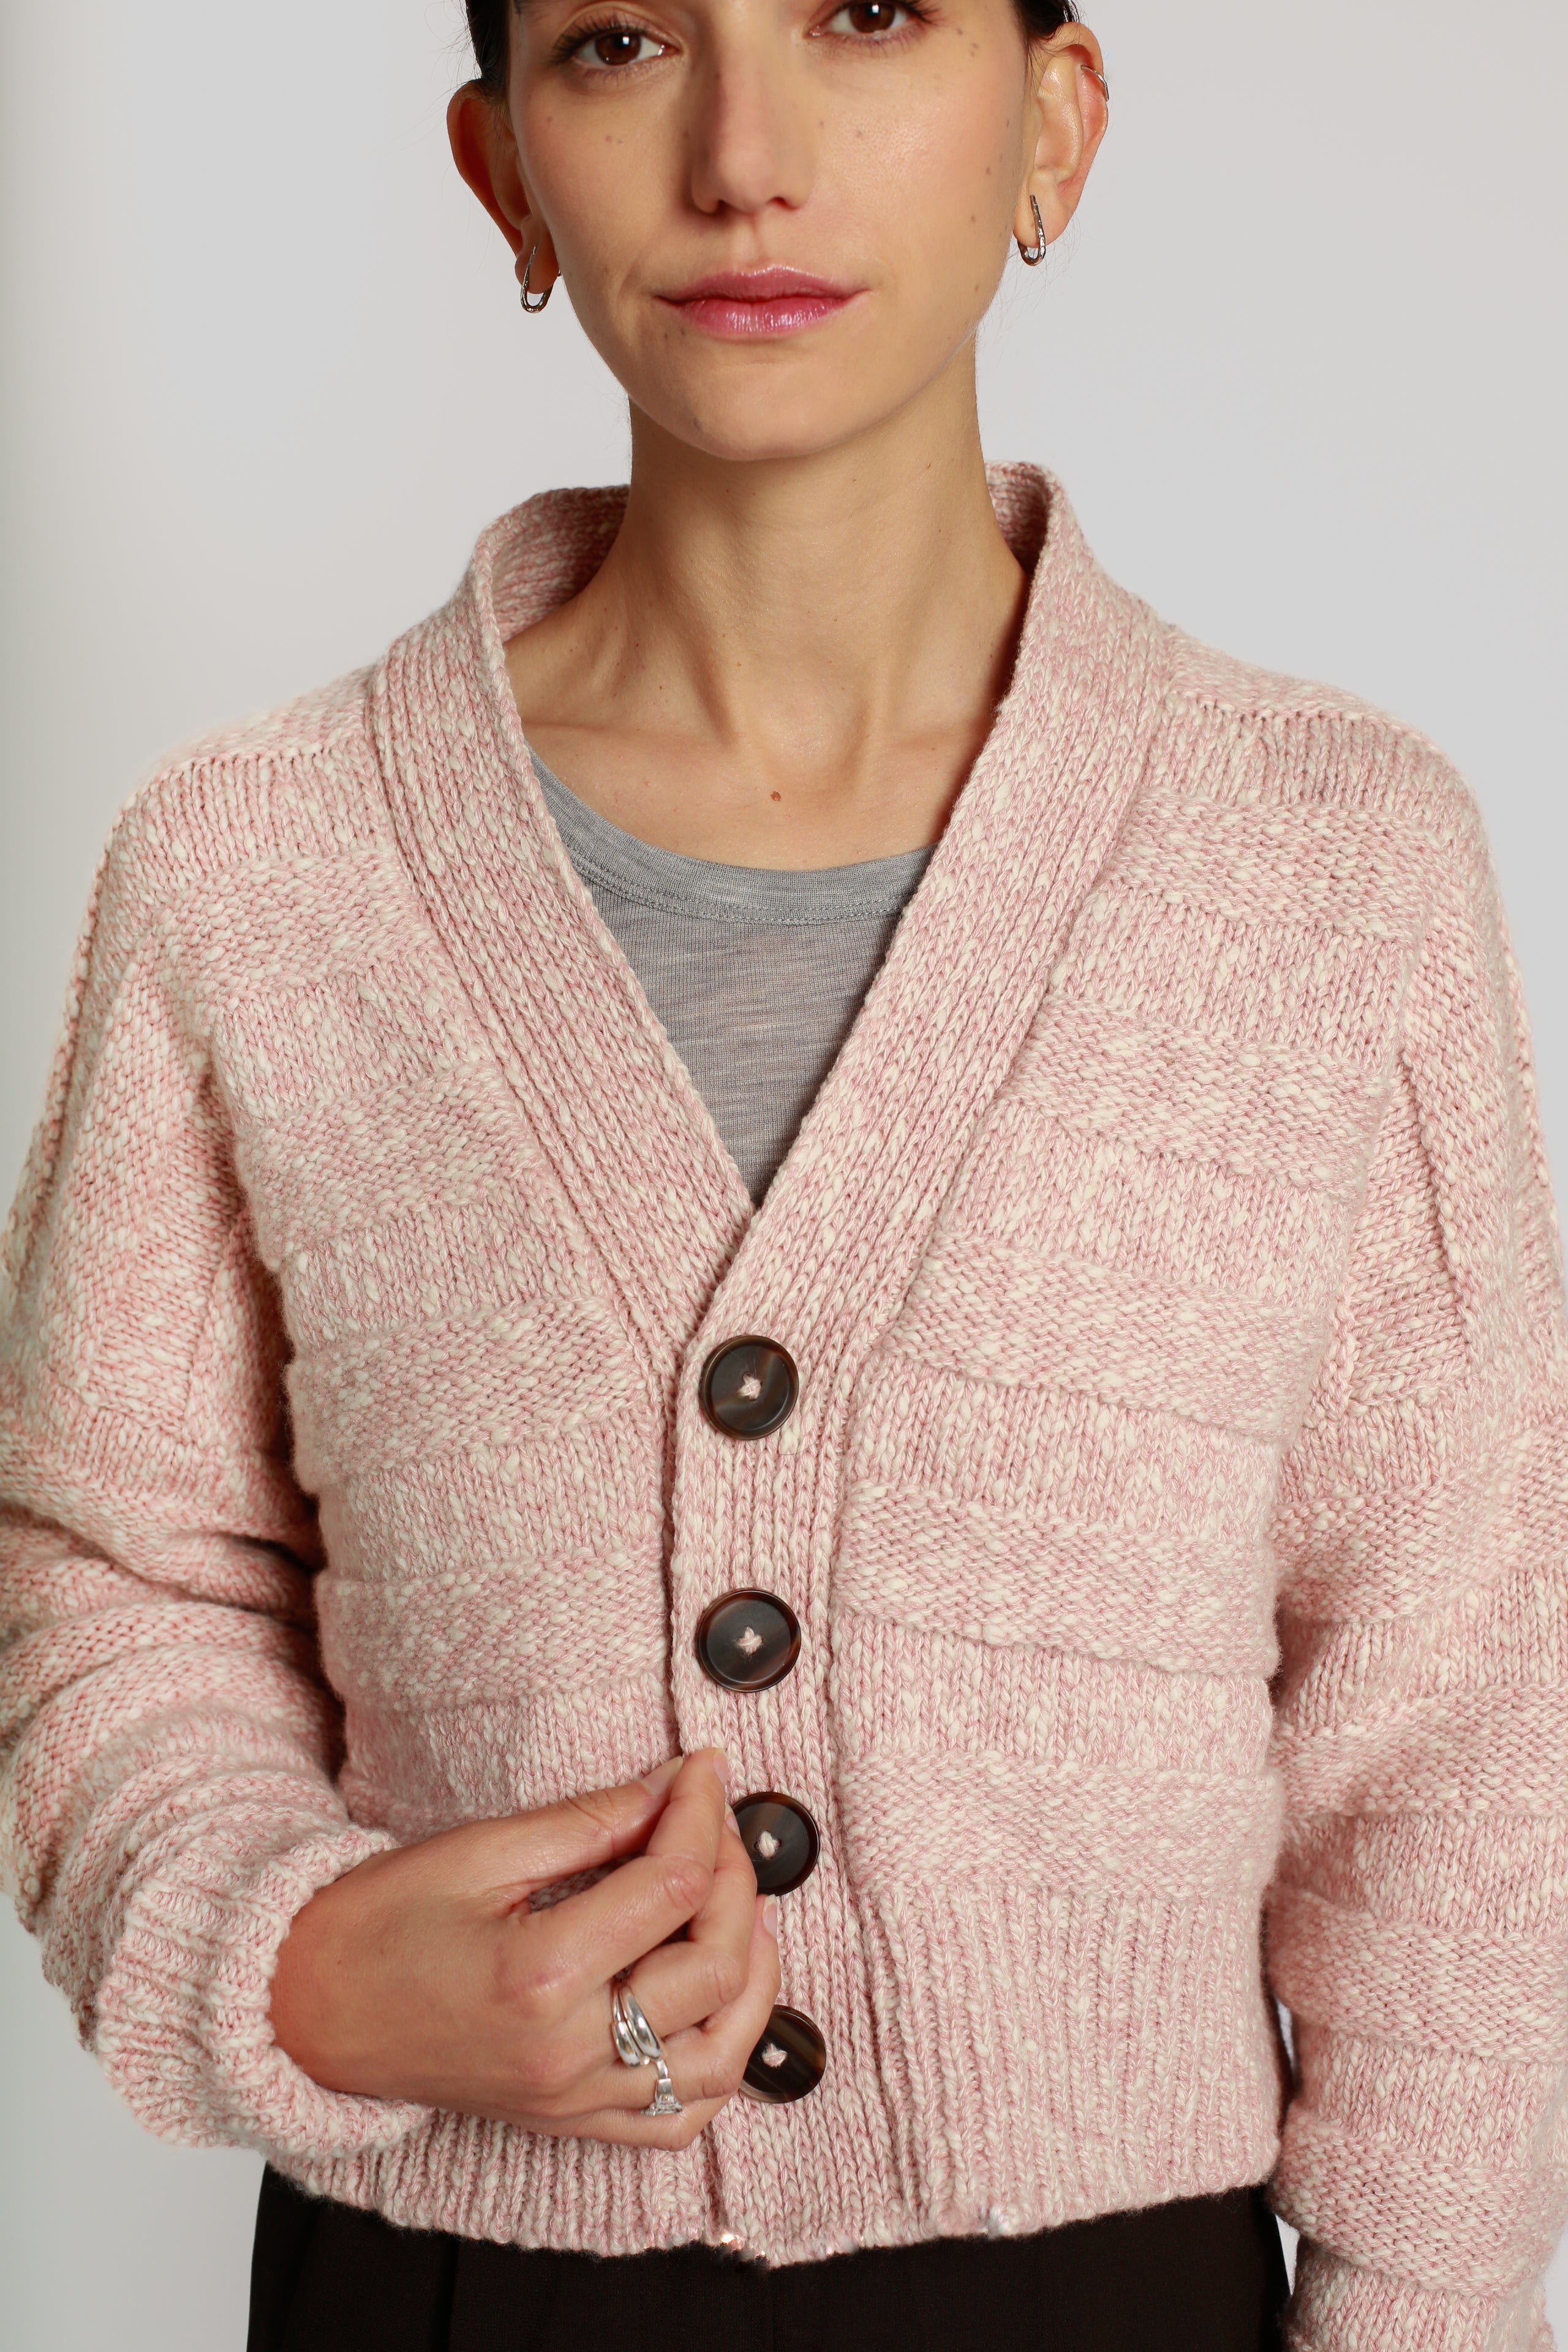 Chiloe cardigan - Made to order